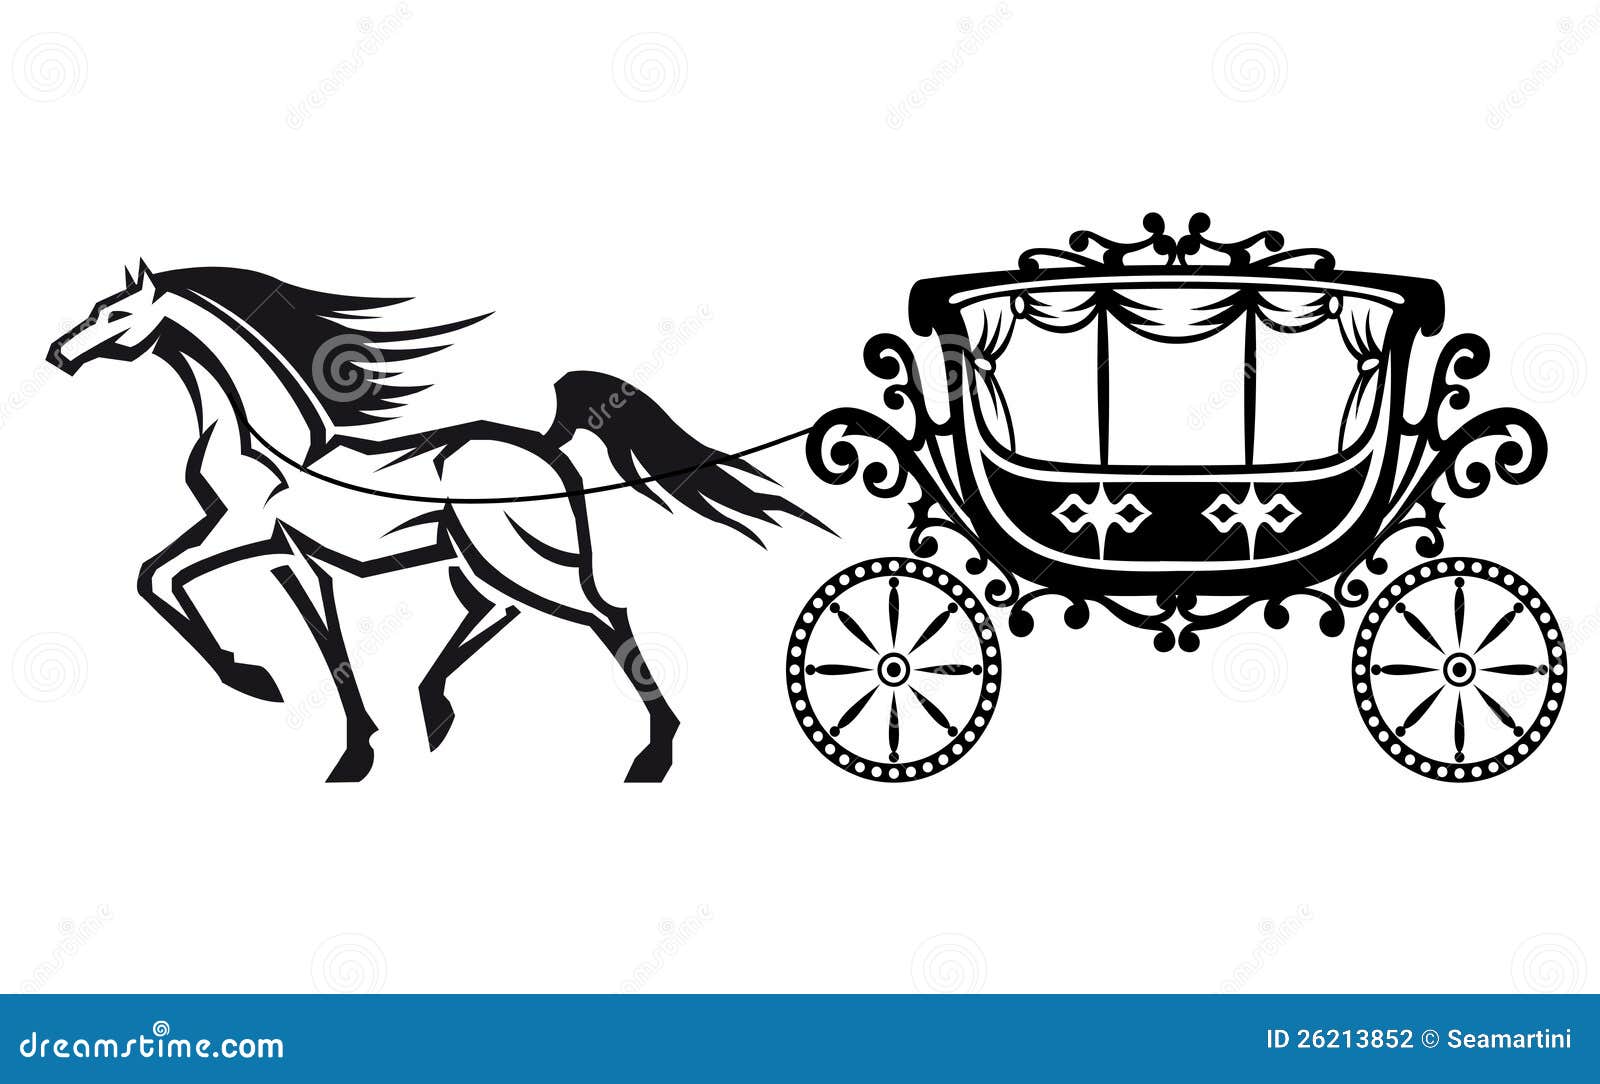 horse and cart clipart - photo #46